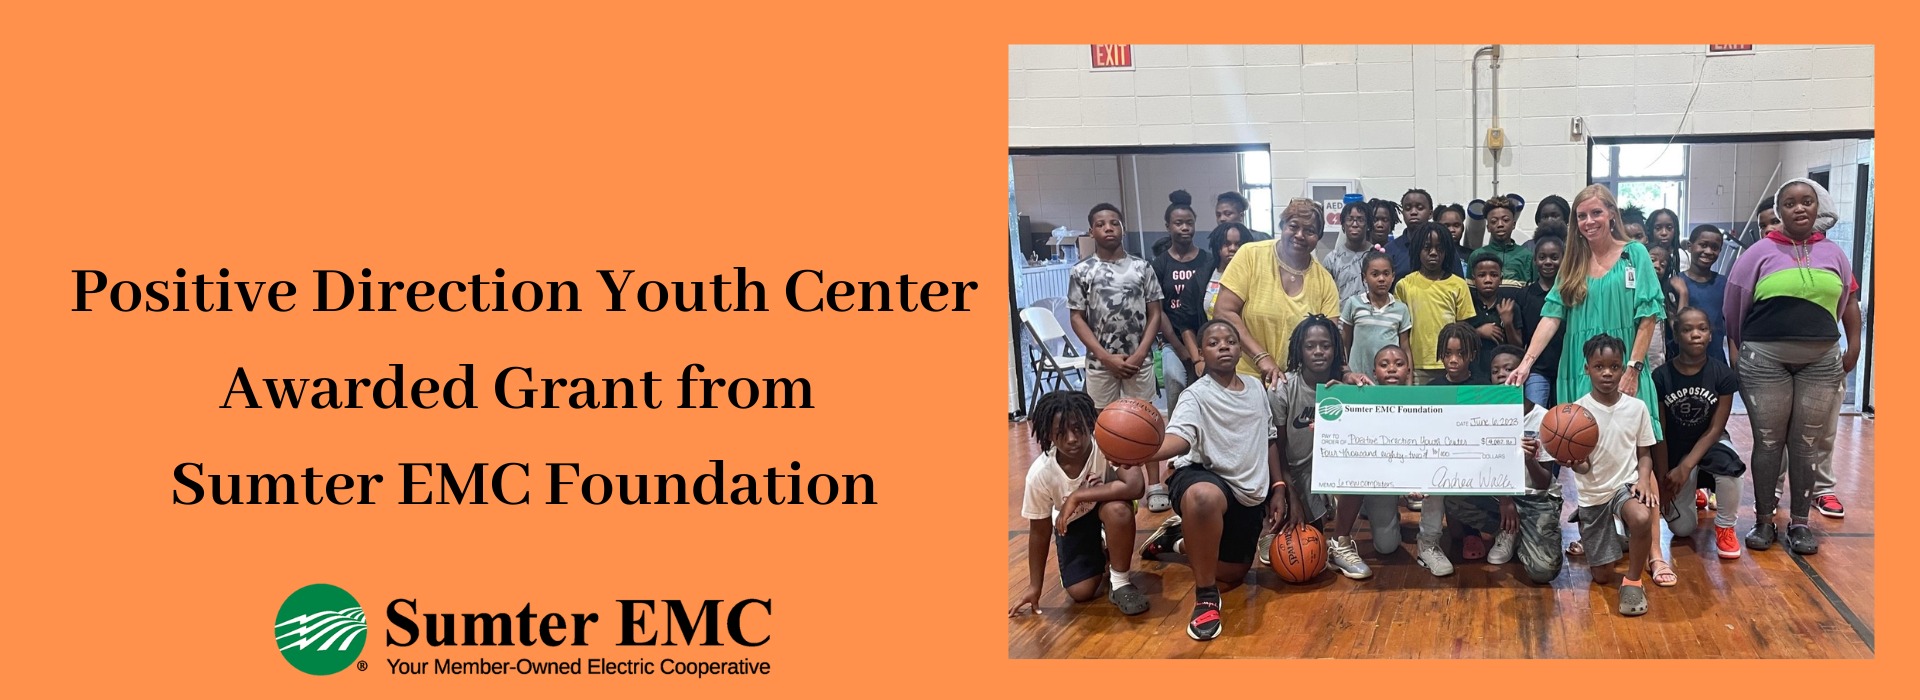 Positive Direction Youth Center  Awarded Grant from Sumter EMC Foundation